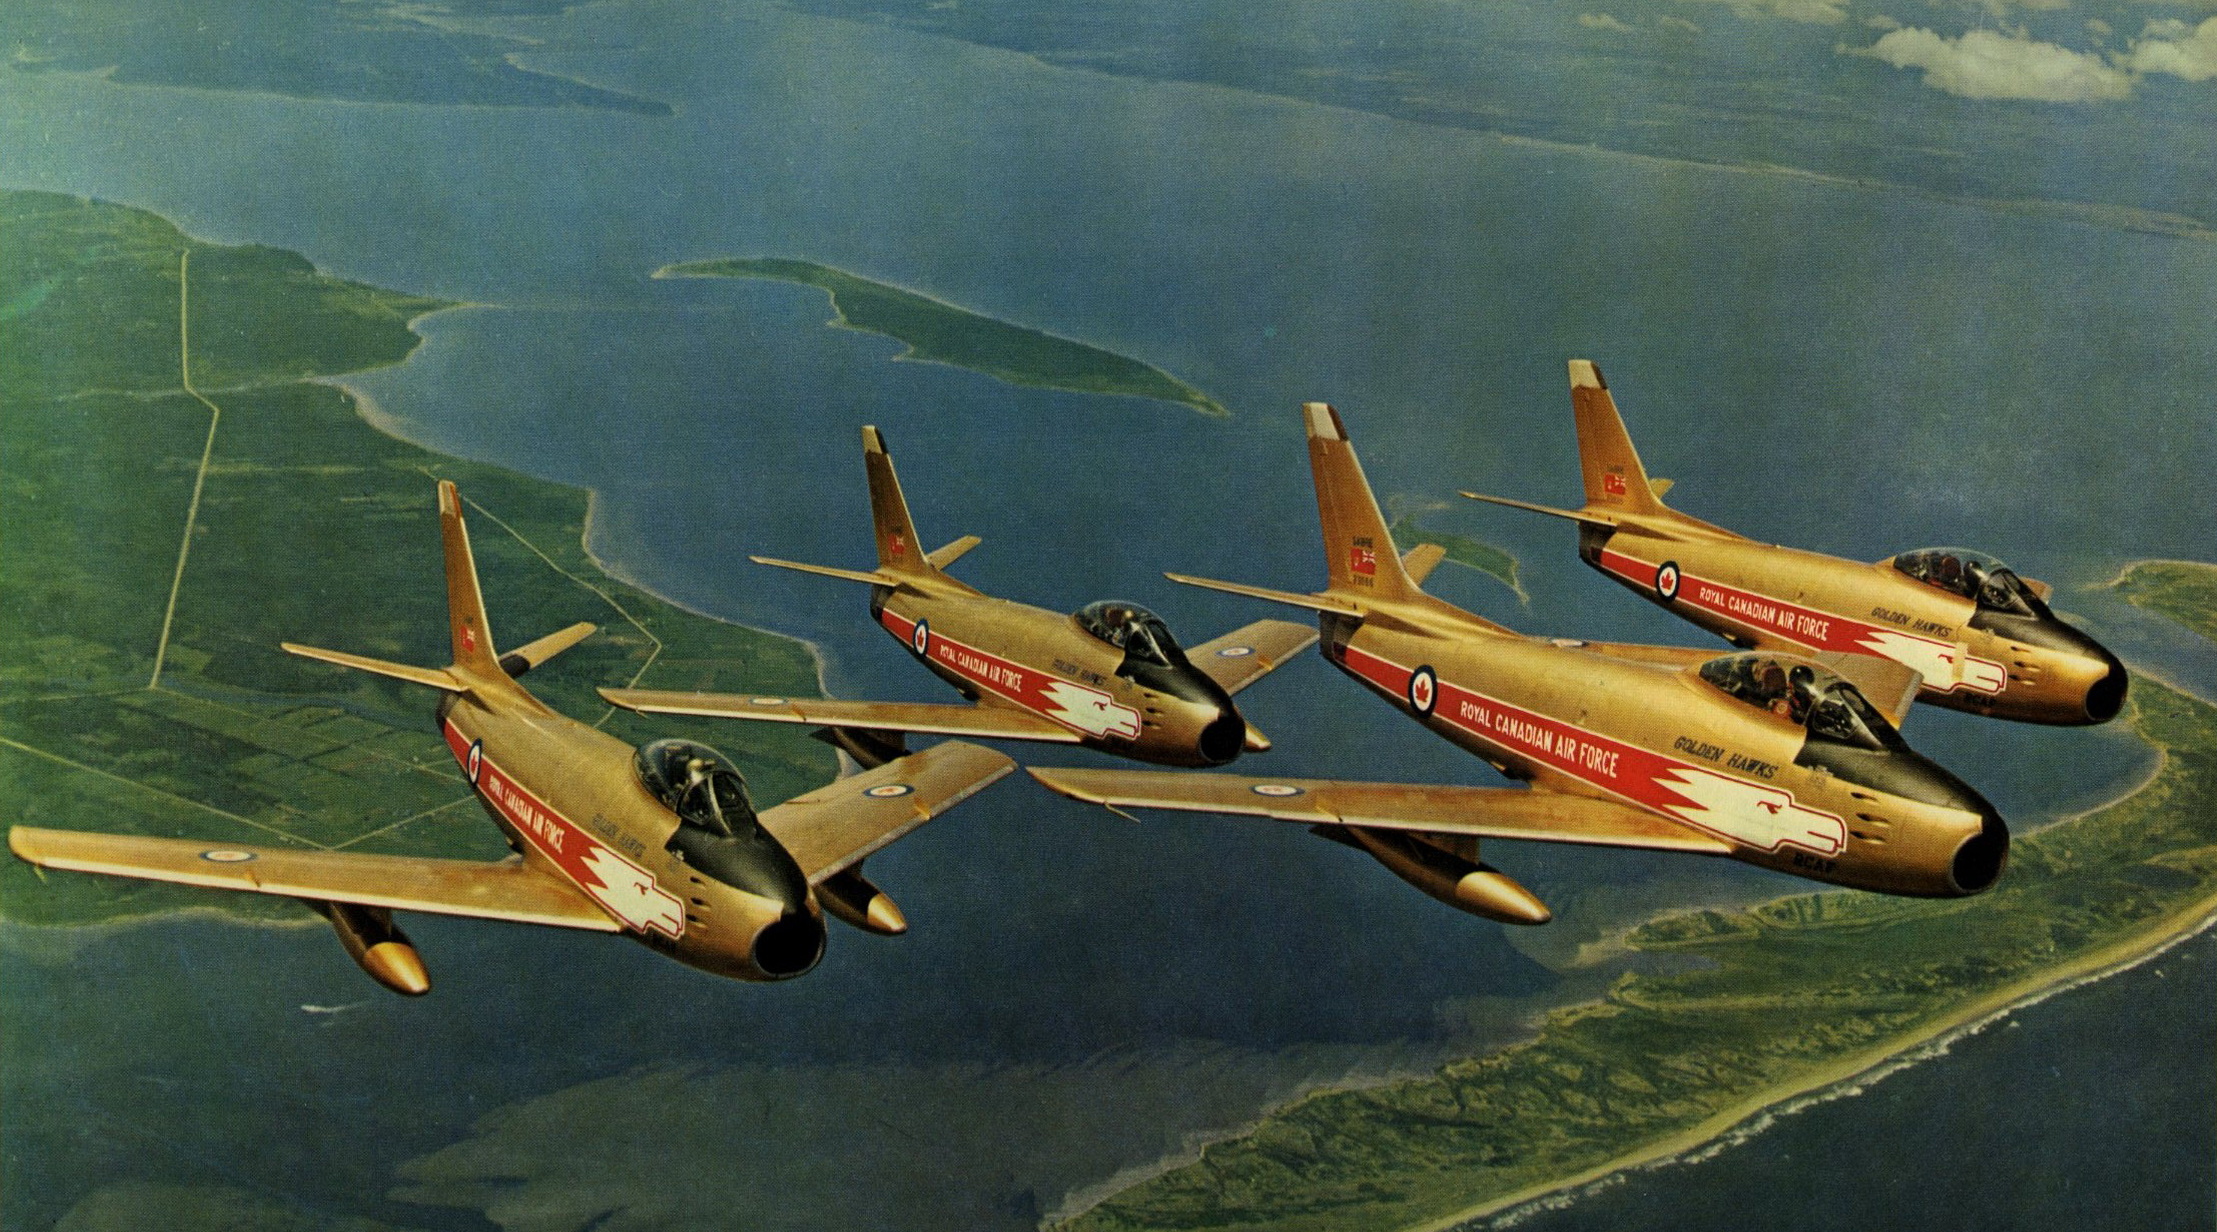 Four Canadair Sabres in Golden Hawks livery fly in formation